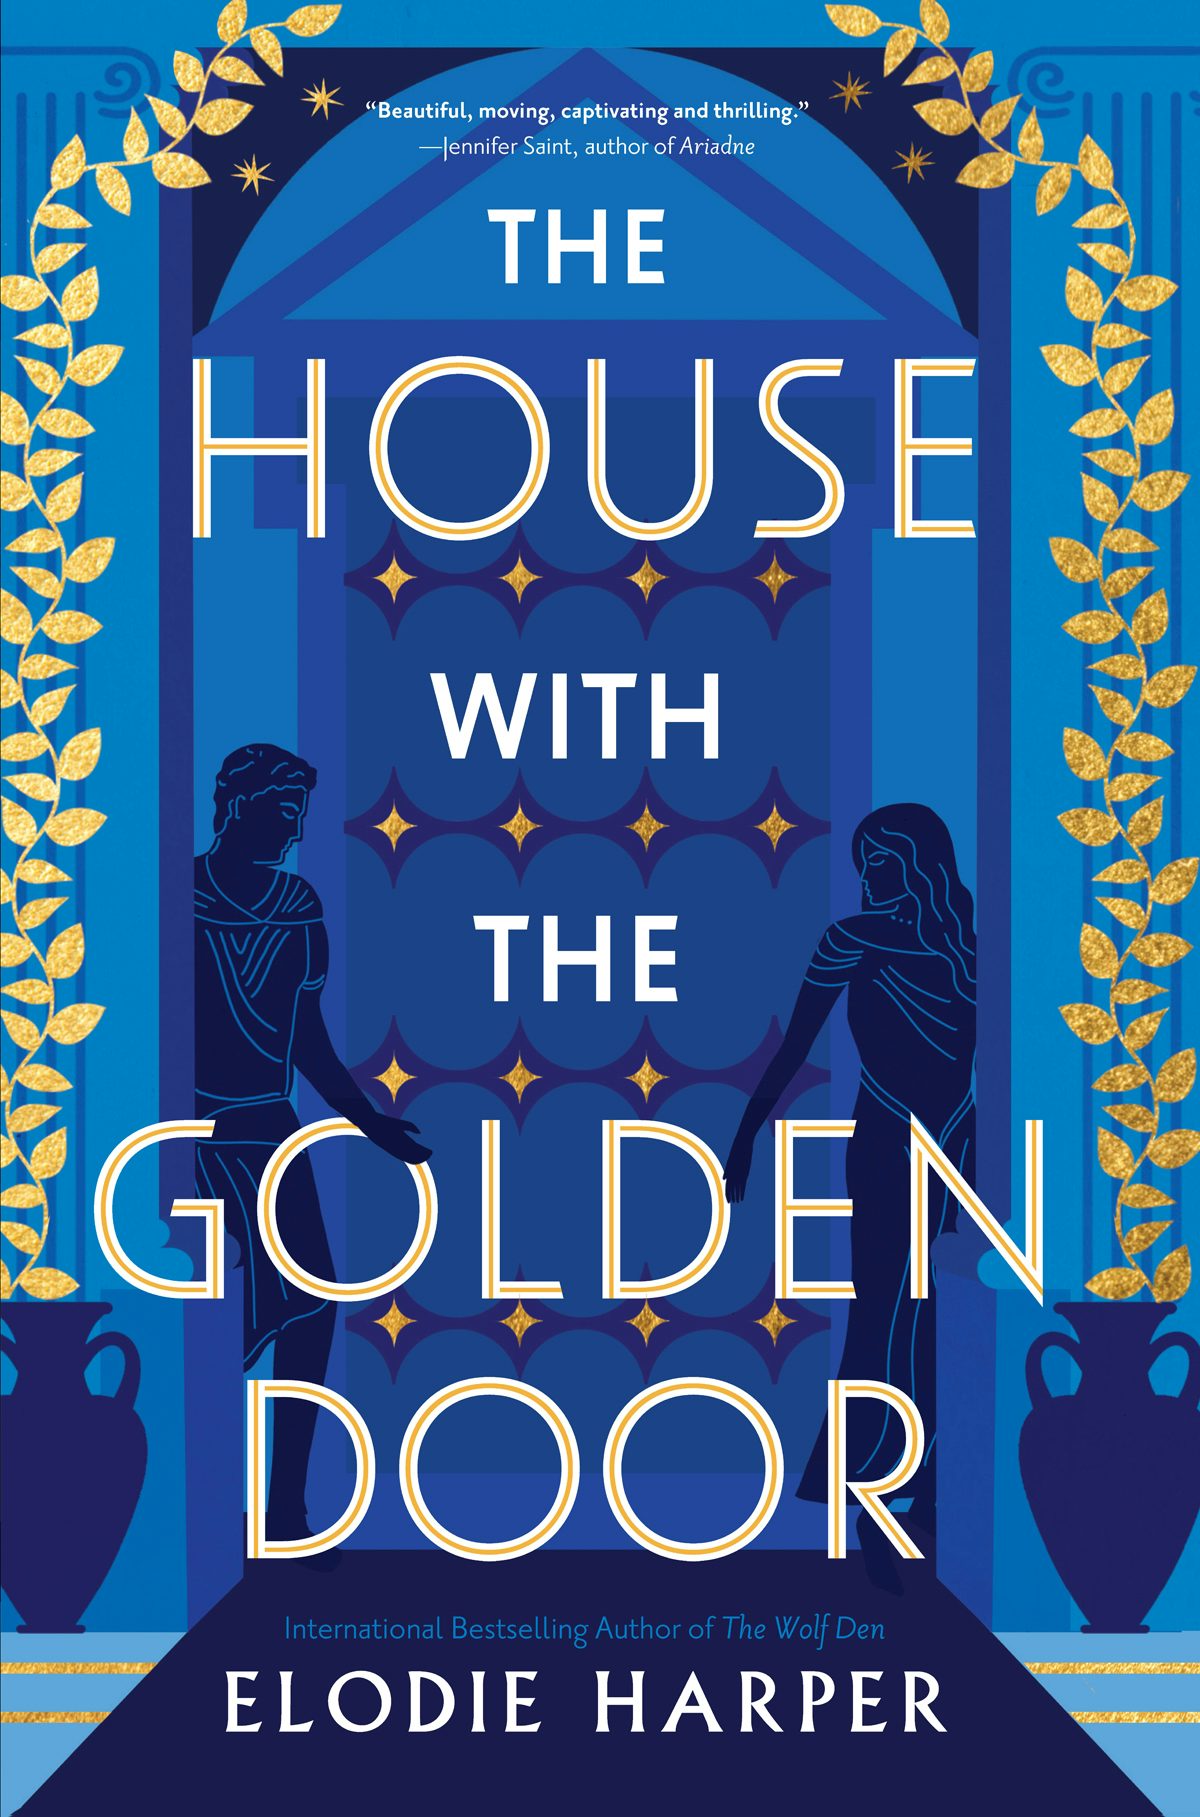 The House with the Golden Door by Elodie Harper: 9781454946625 